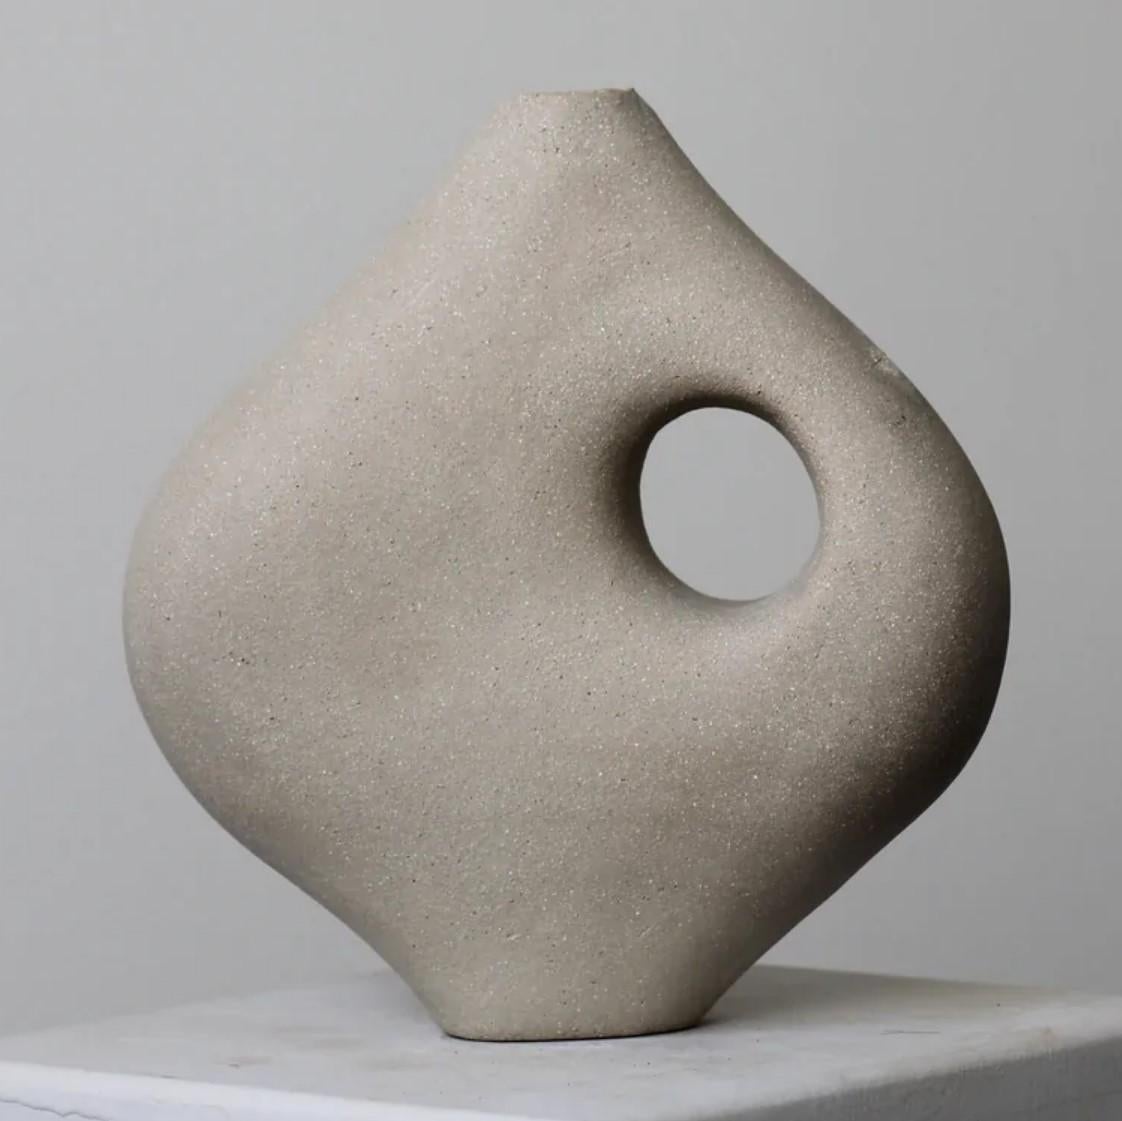 Large 1st Generation Pleomorph 34D Sculpture by Abid Javed
Dimensions: W 30 x D 10 x 40 cm (Dimensions are variable)
Materials: Ceramic stoneware.
Available in multiple clay body and size options.

Ceramic stoneware vessel. Clear-glazed